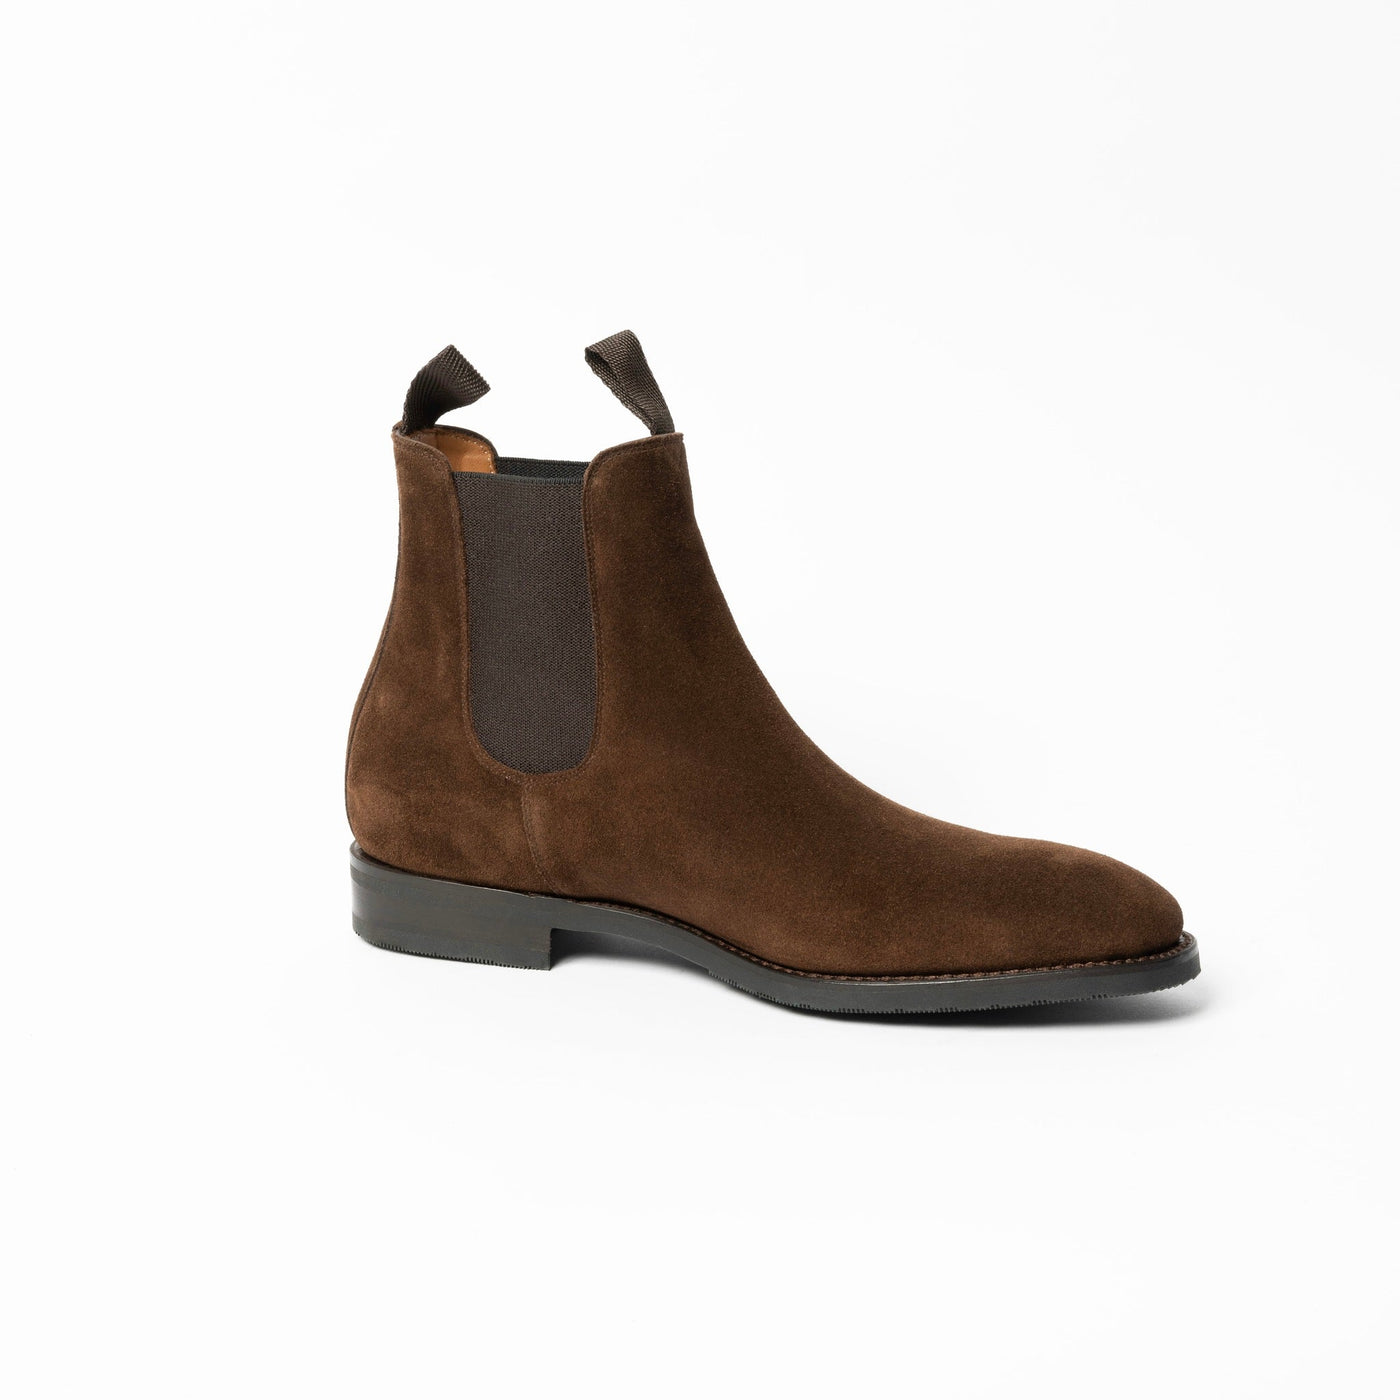 Good year welt chelsea boots in brown suede. Rubber sole.